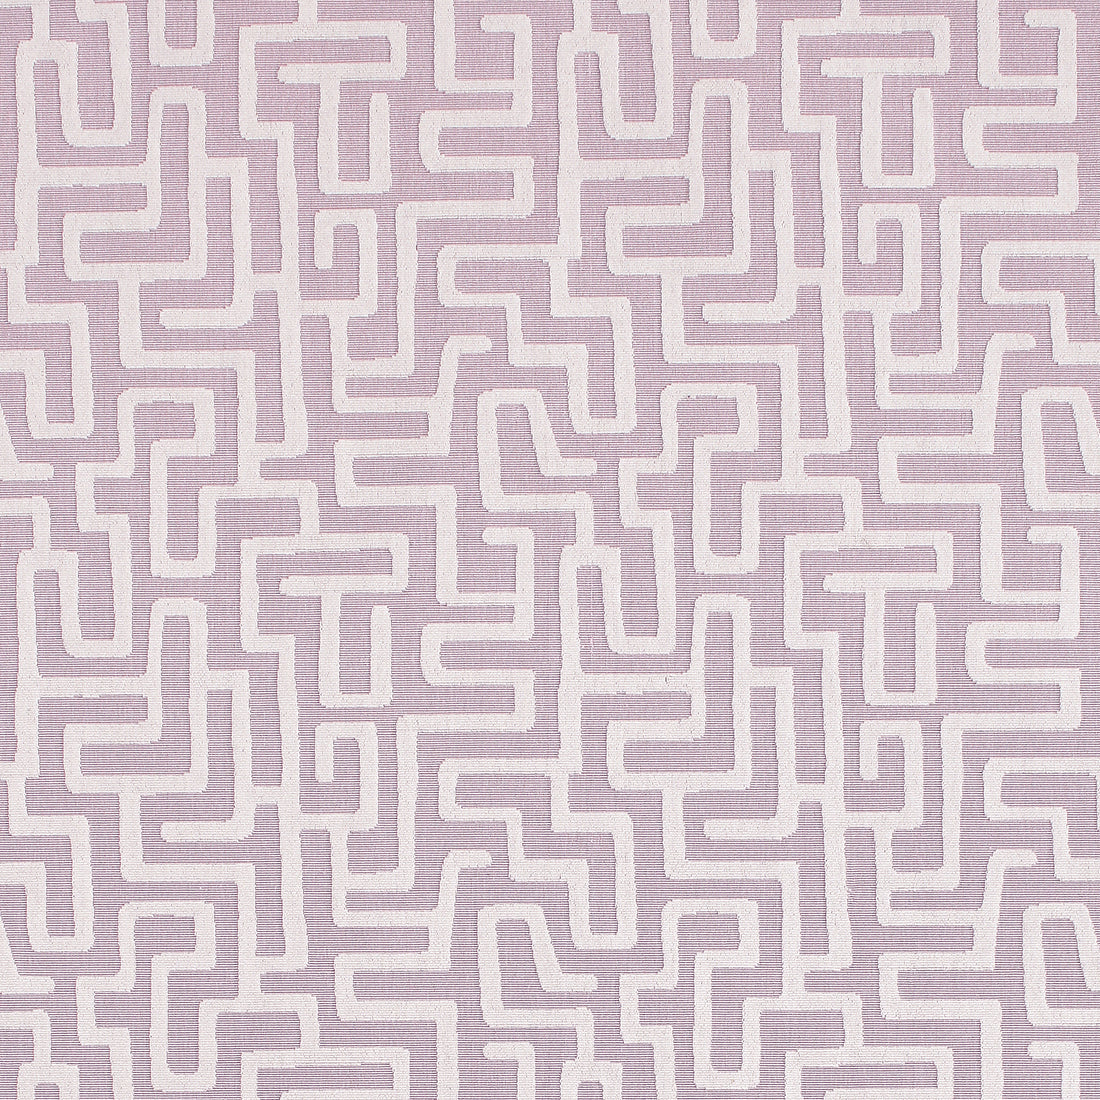 Terrace Lane fabric in lavender color - pattern number W742027 - by Thibaut in the Sojourn collection